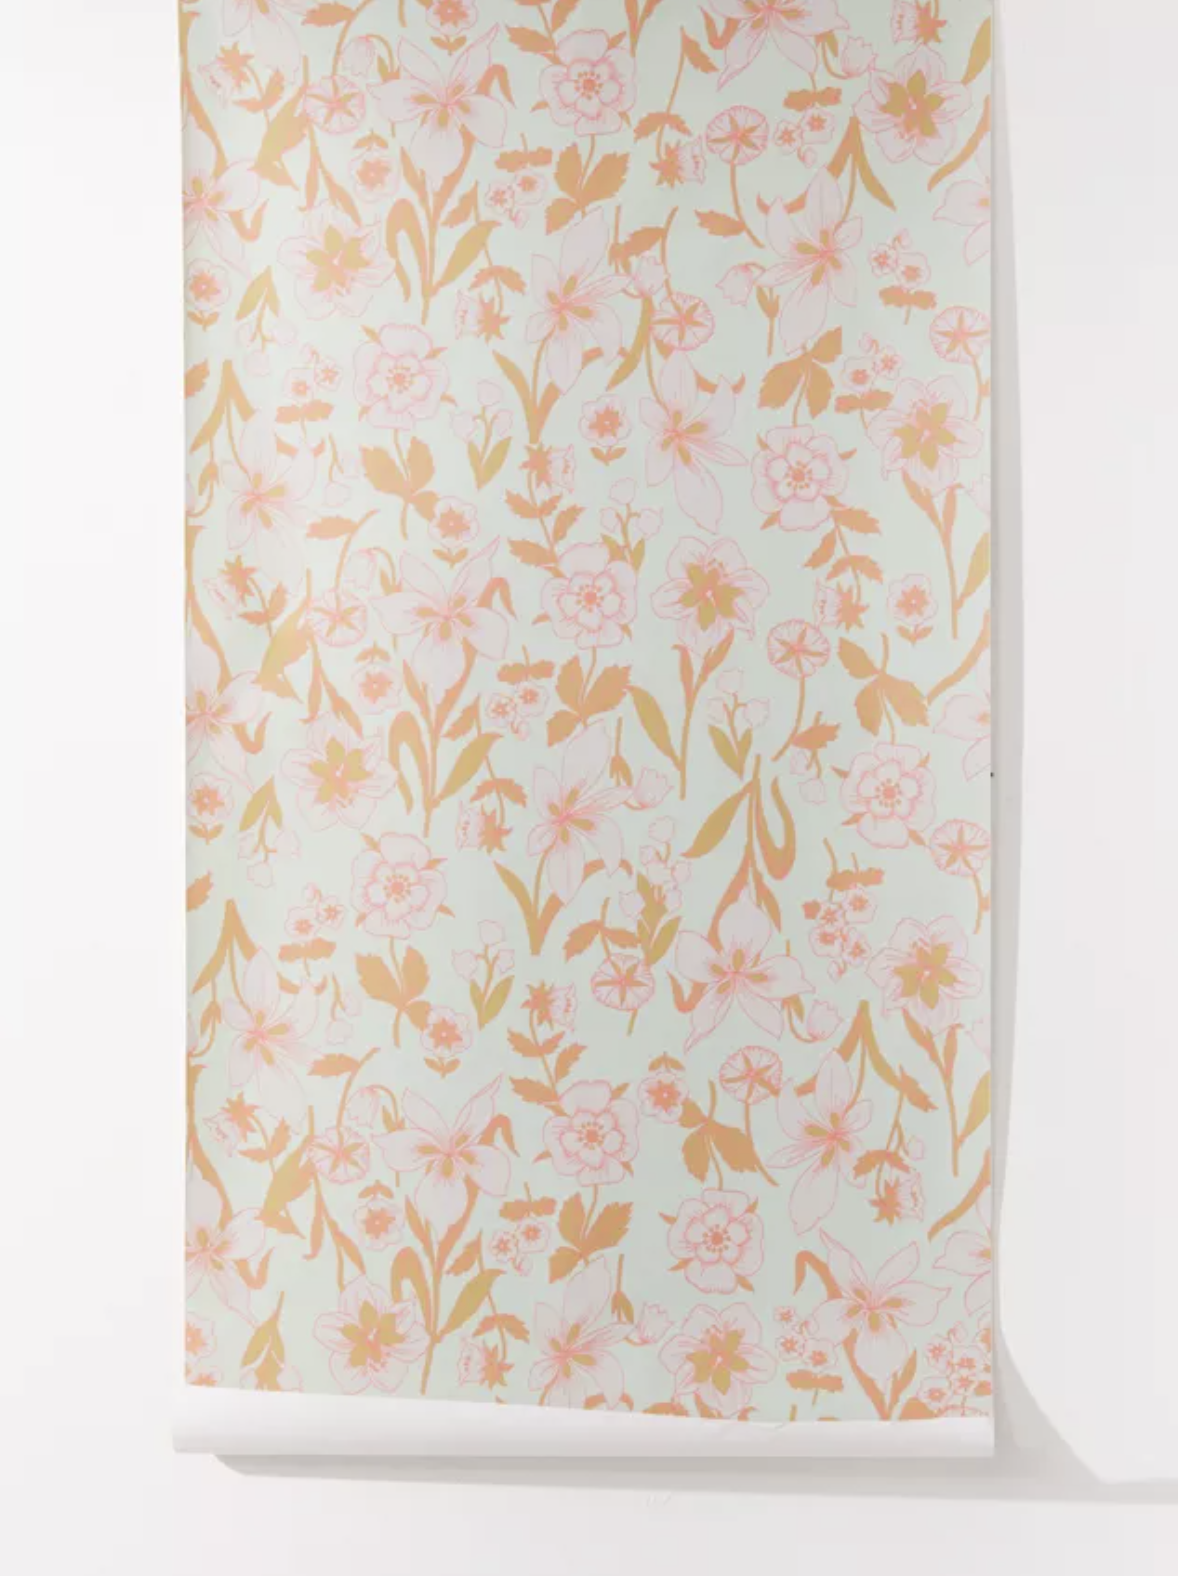 Mint green wallpaper with pink and orange flowers hung on white wall